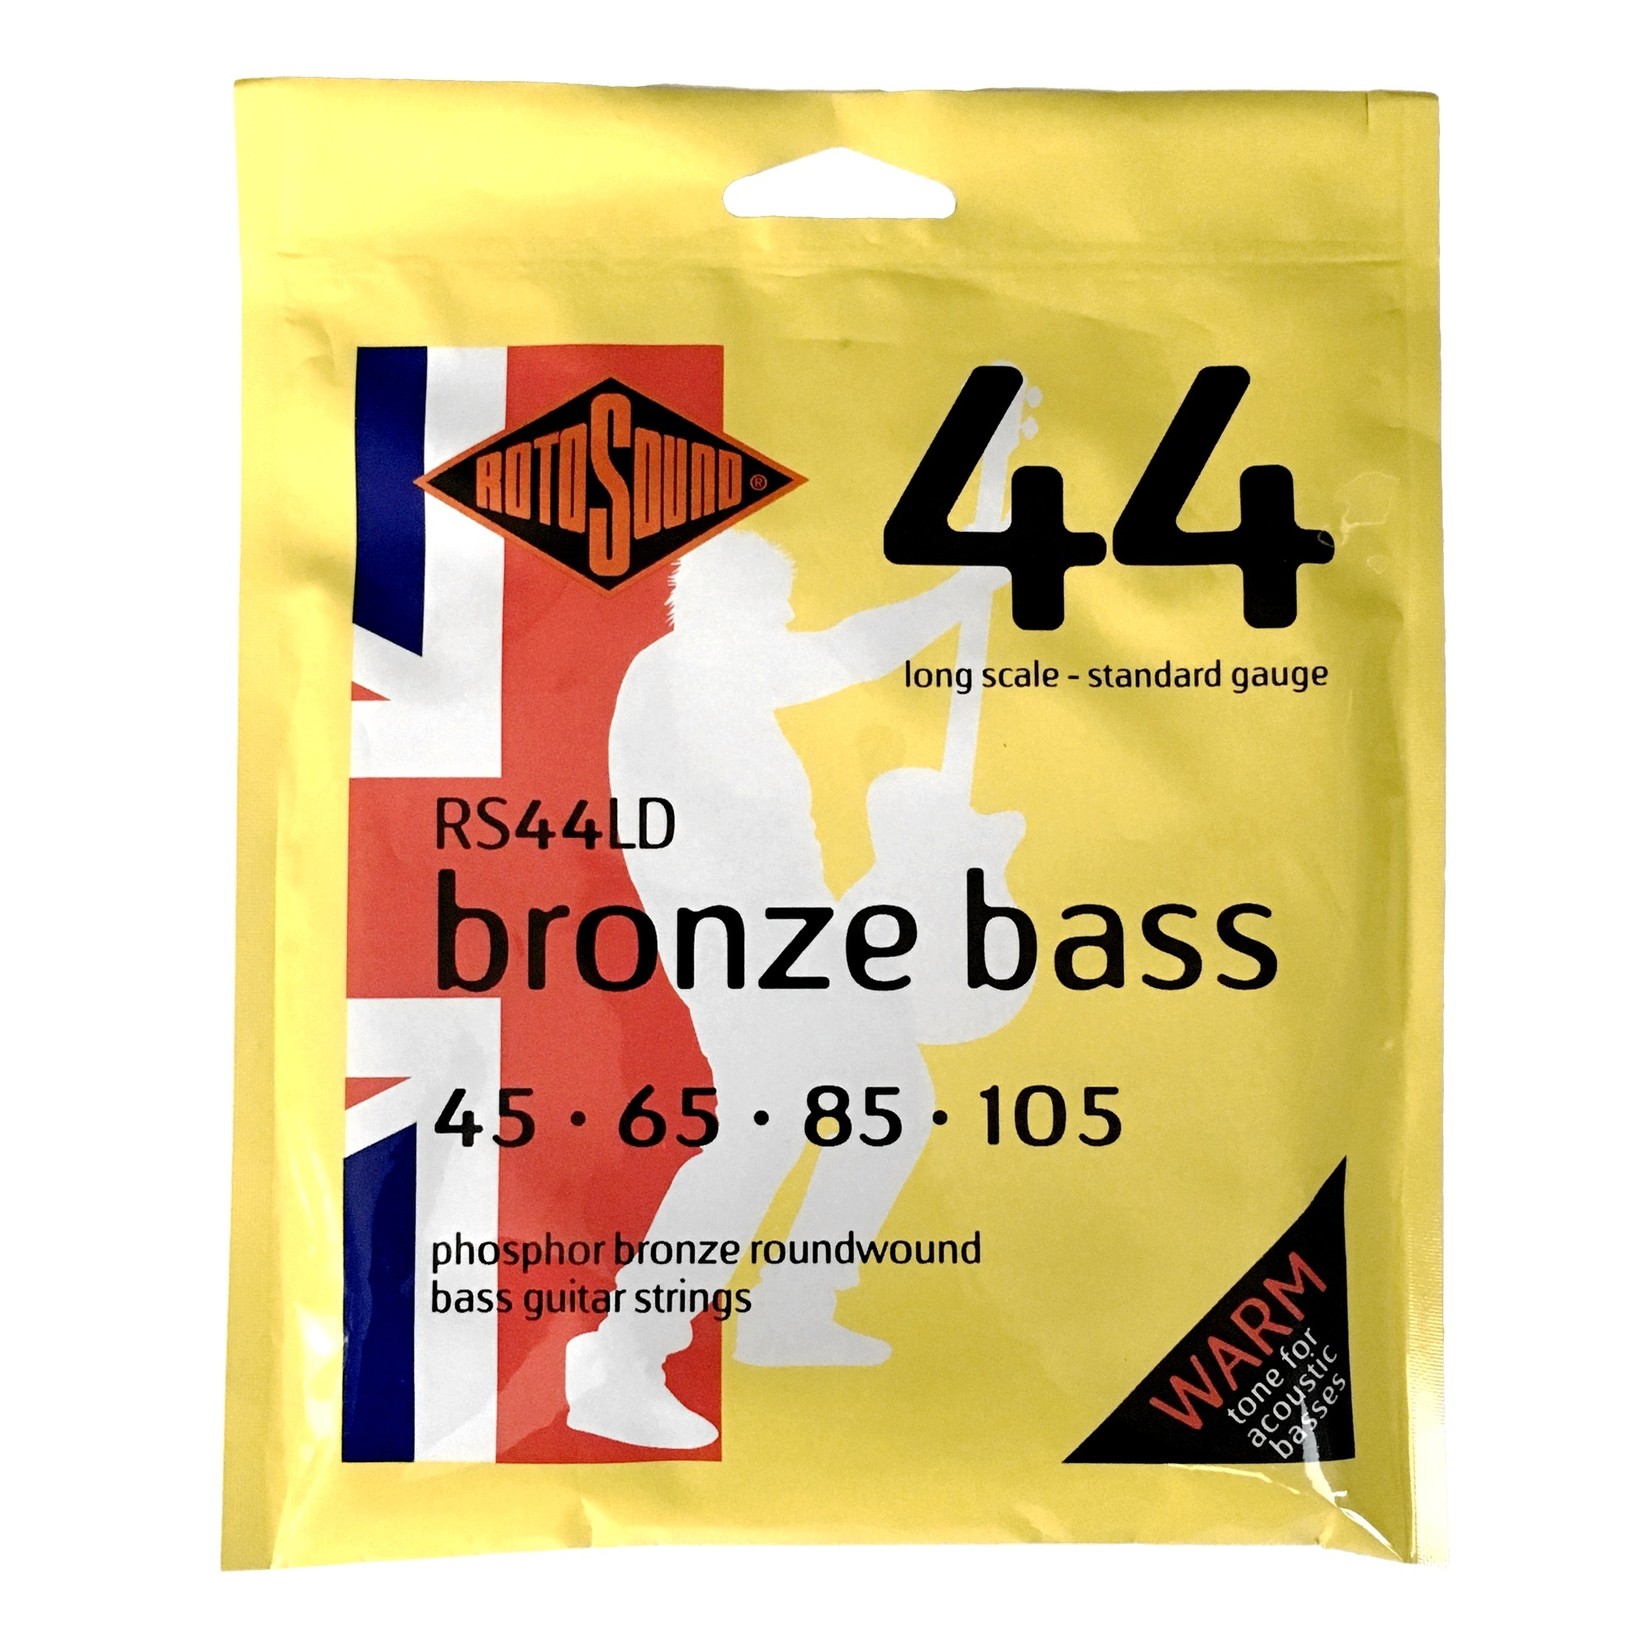 Rotosound Rotosound RS44LD 44 Bronze Bass, Phosphor Bronze Roundwound Bass Guitar Strings (45-105), Acoustic